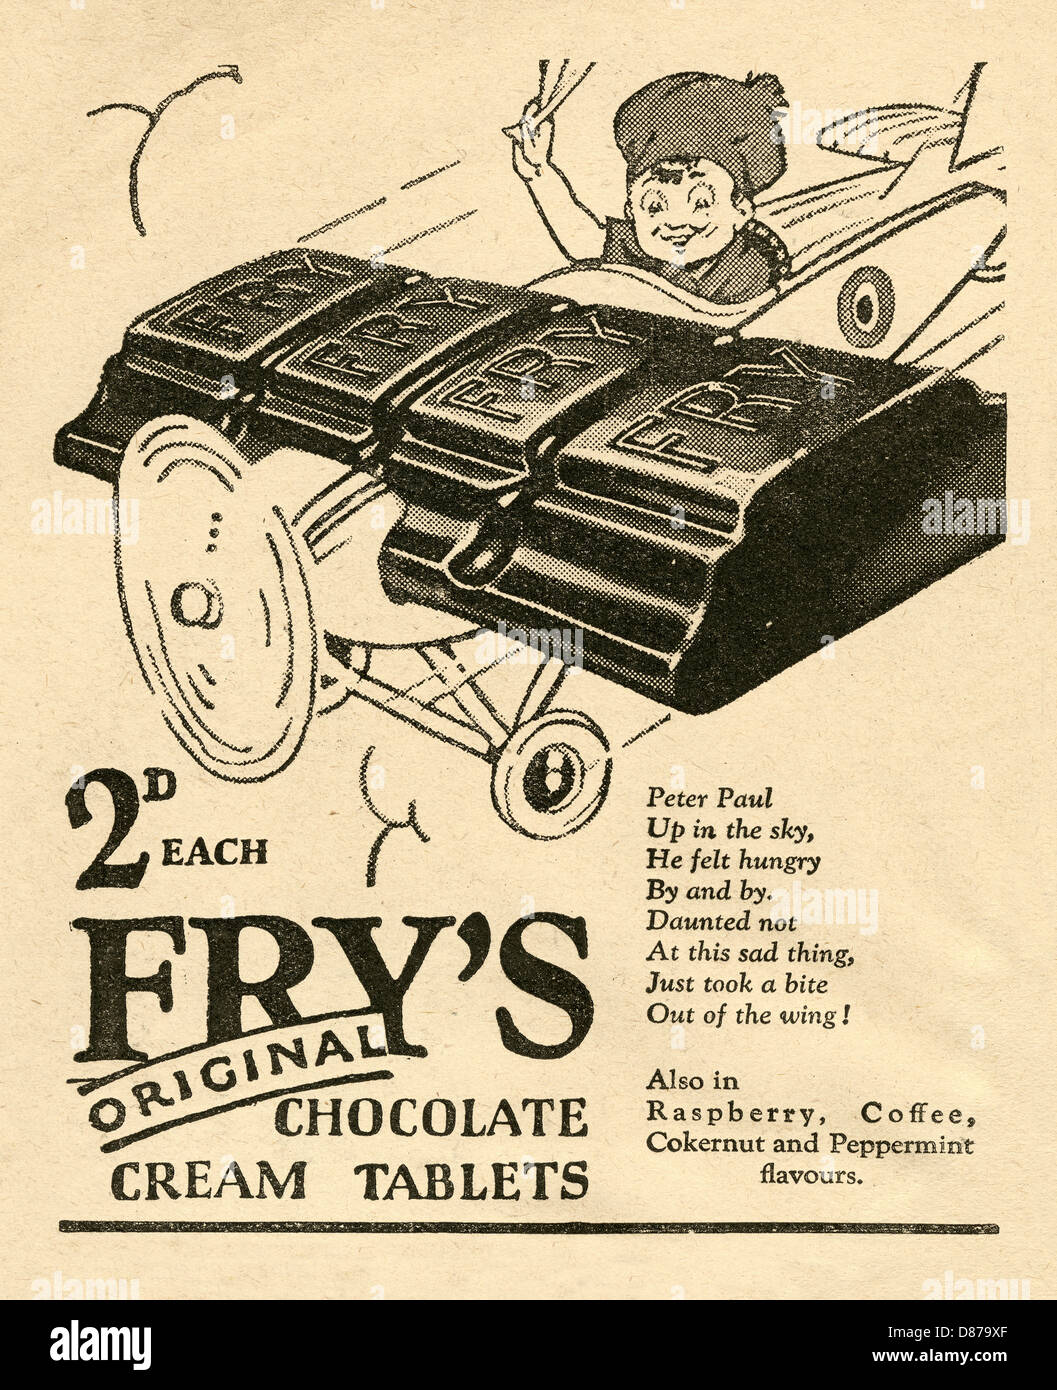 1928 advert for the Fry's chocolate cream tablets - the confectionery illustrated with an aeroplane Stock Photo